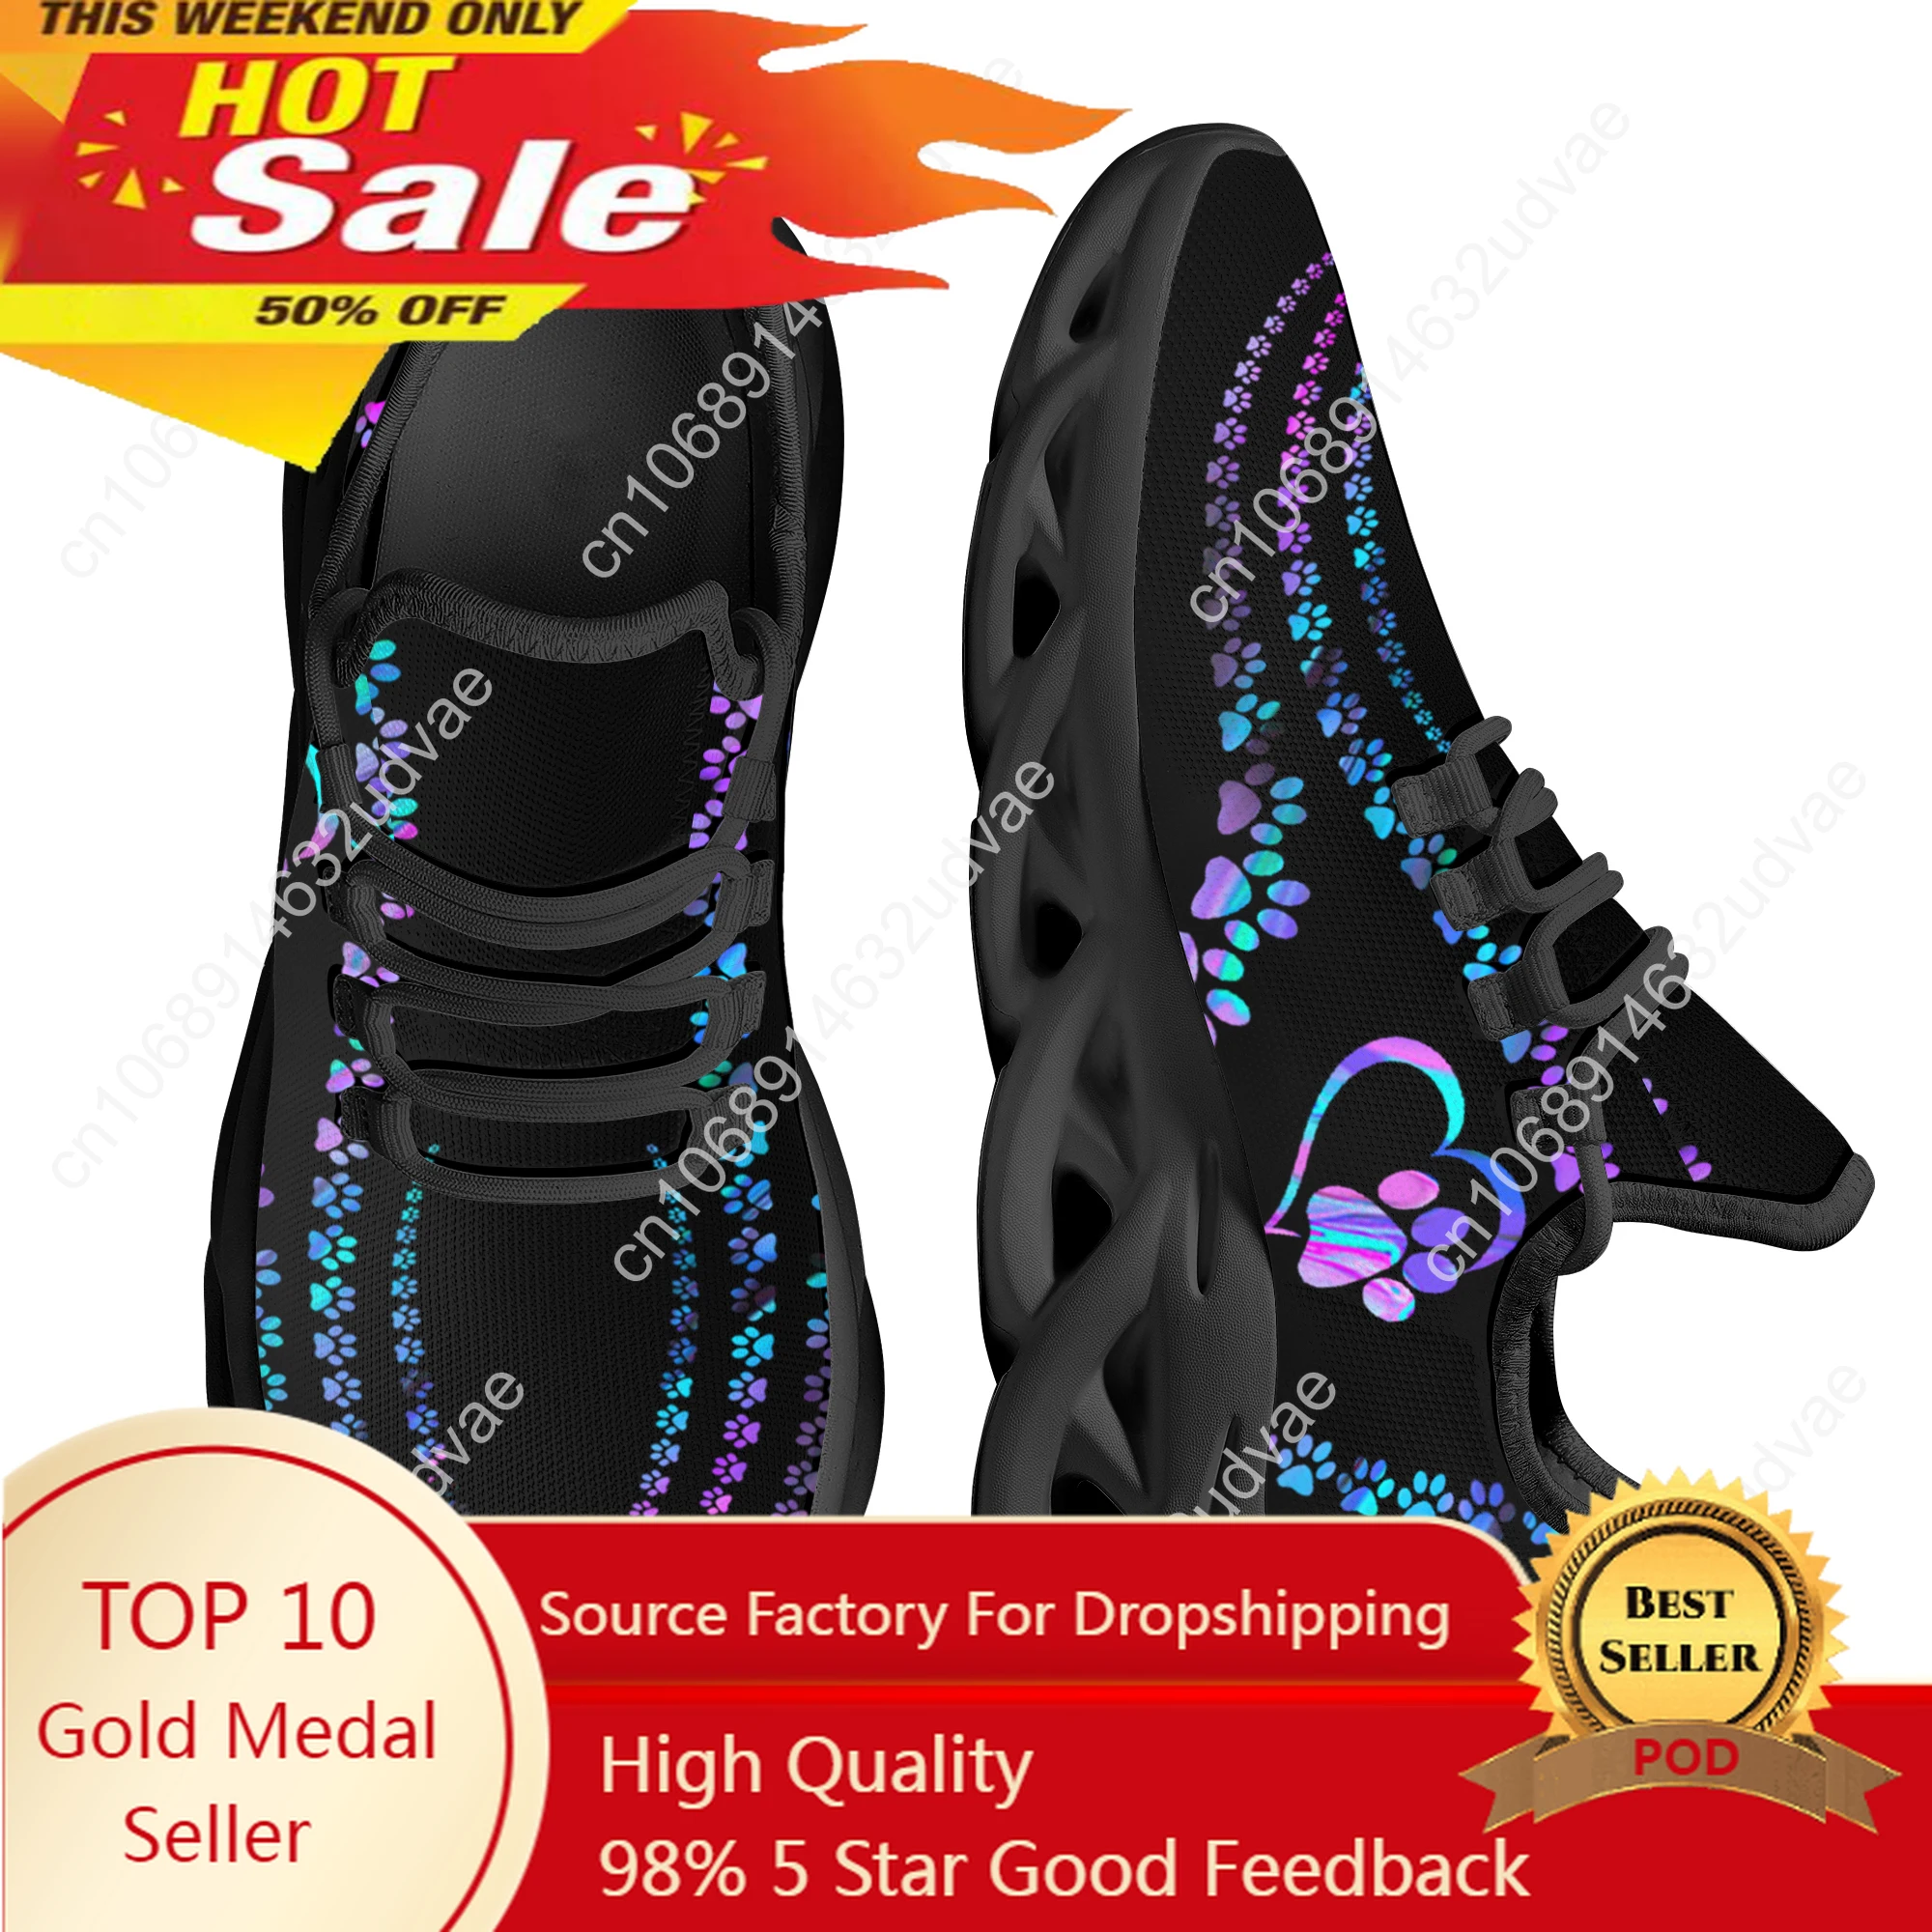 

Cool Dog Footprint Camouflage Printing Flat Shoes for Women Breathable Soft Sneakers Lace up Casual Platform Zapatos